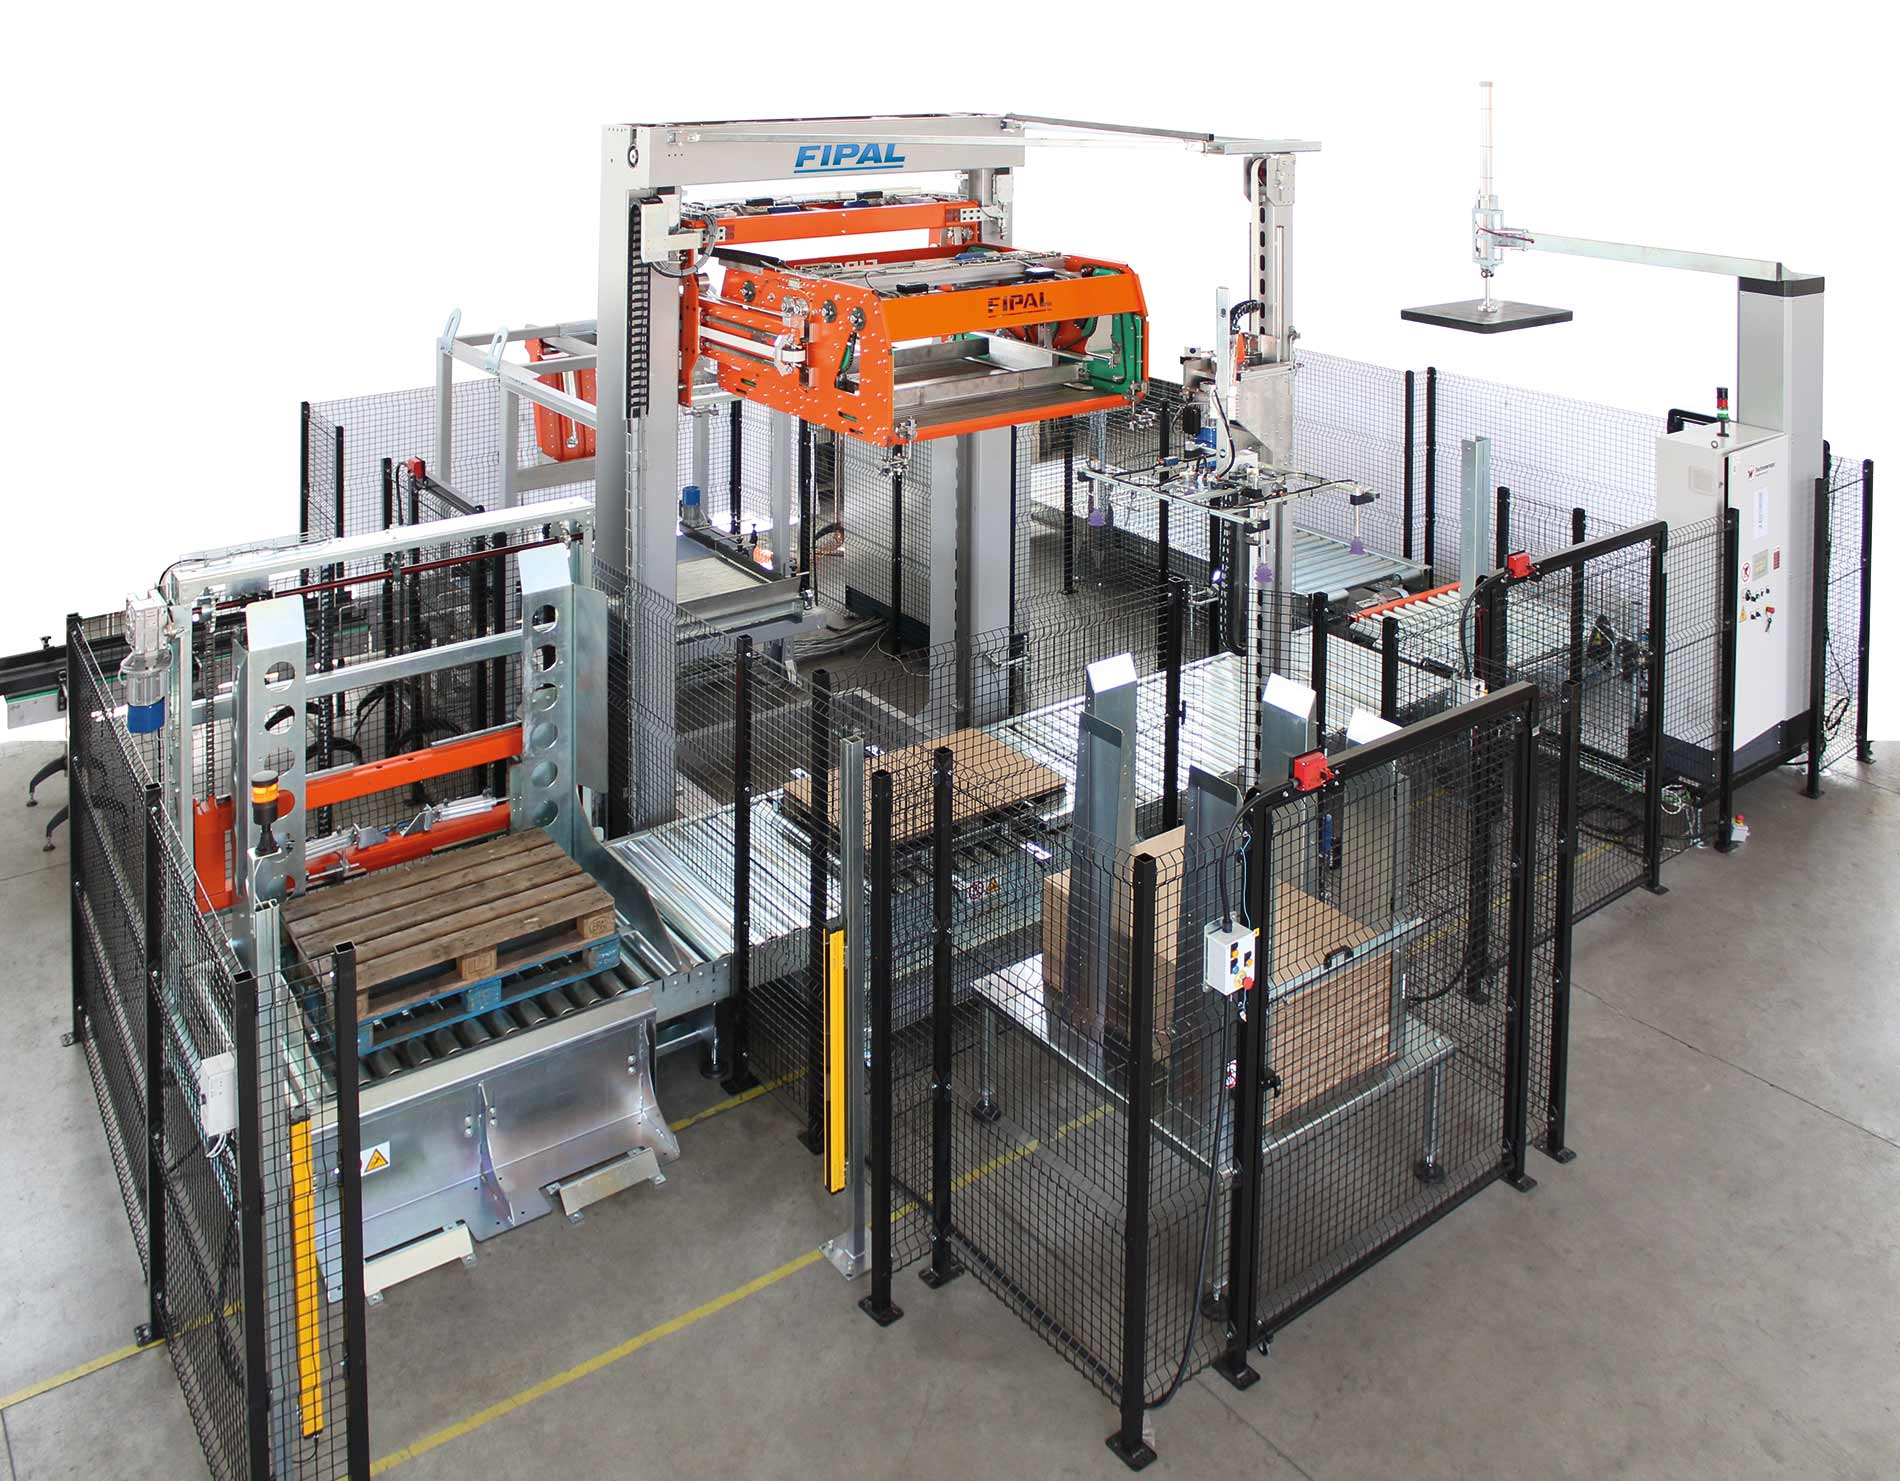 Top 10 most frequently asked palletizer industry questions, answered.